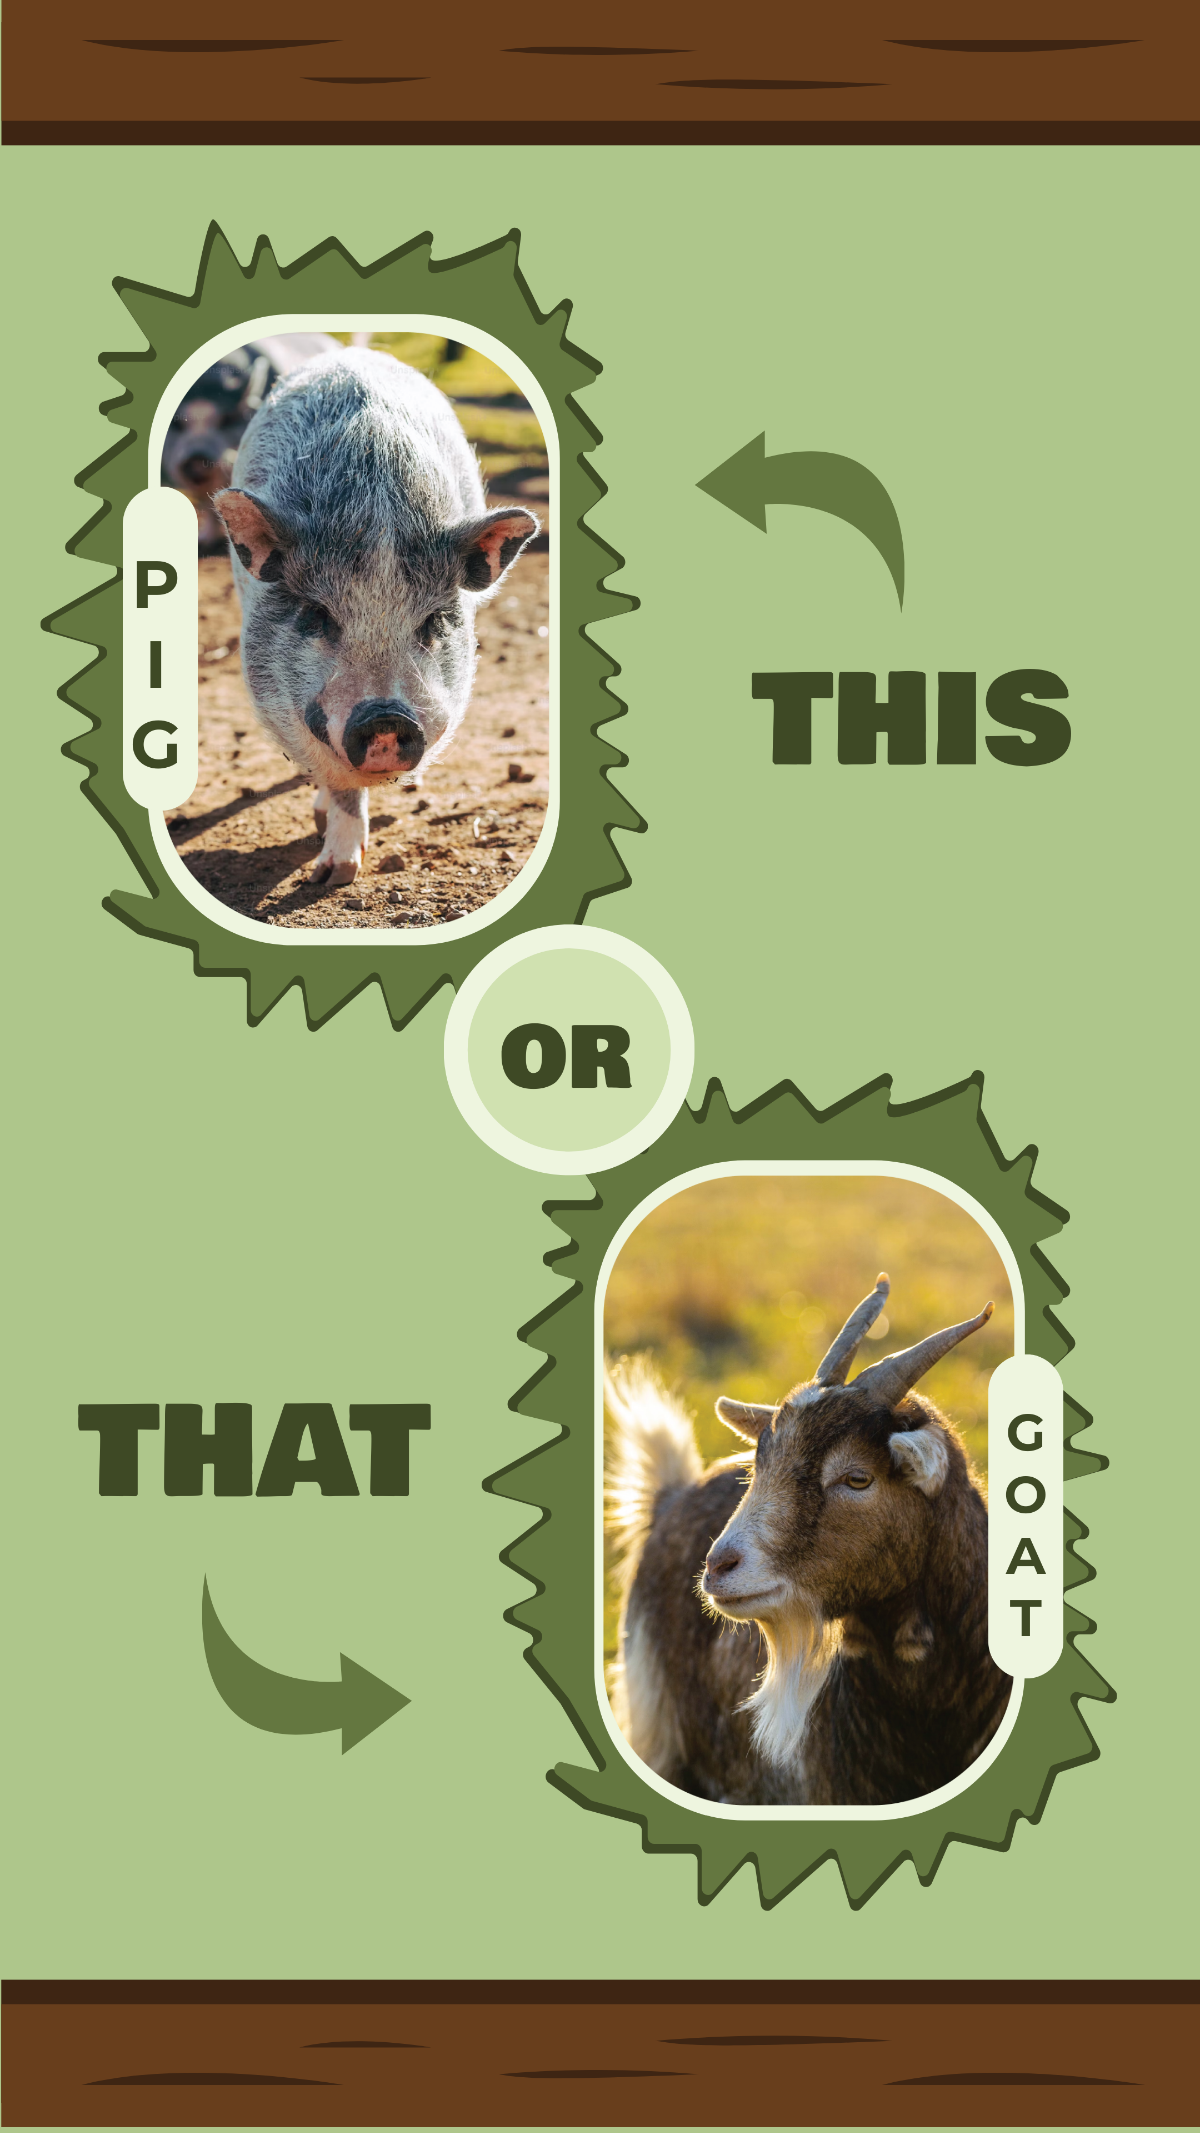 Pig or Goat This or That Story Template